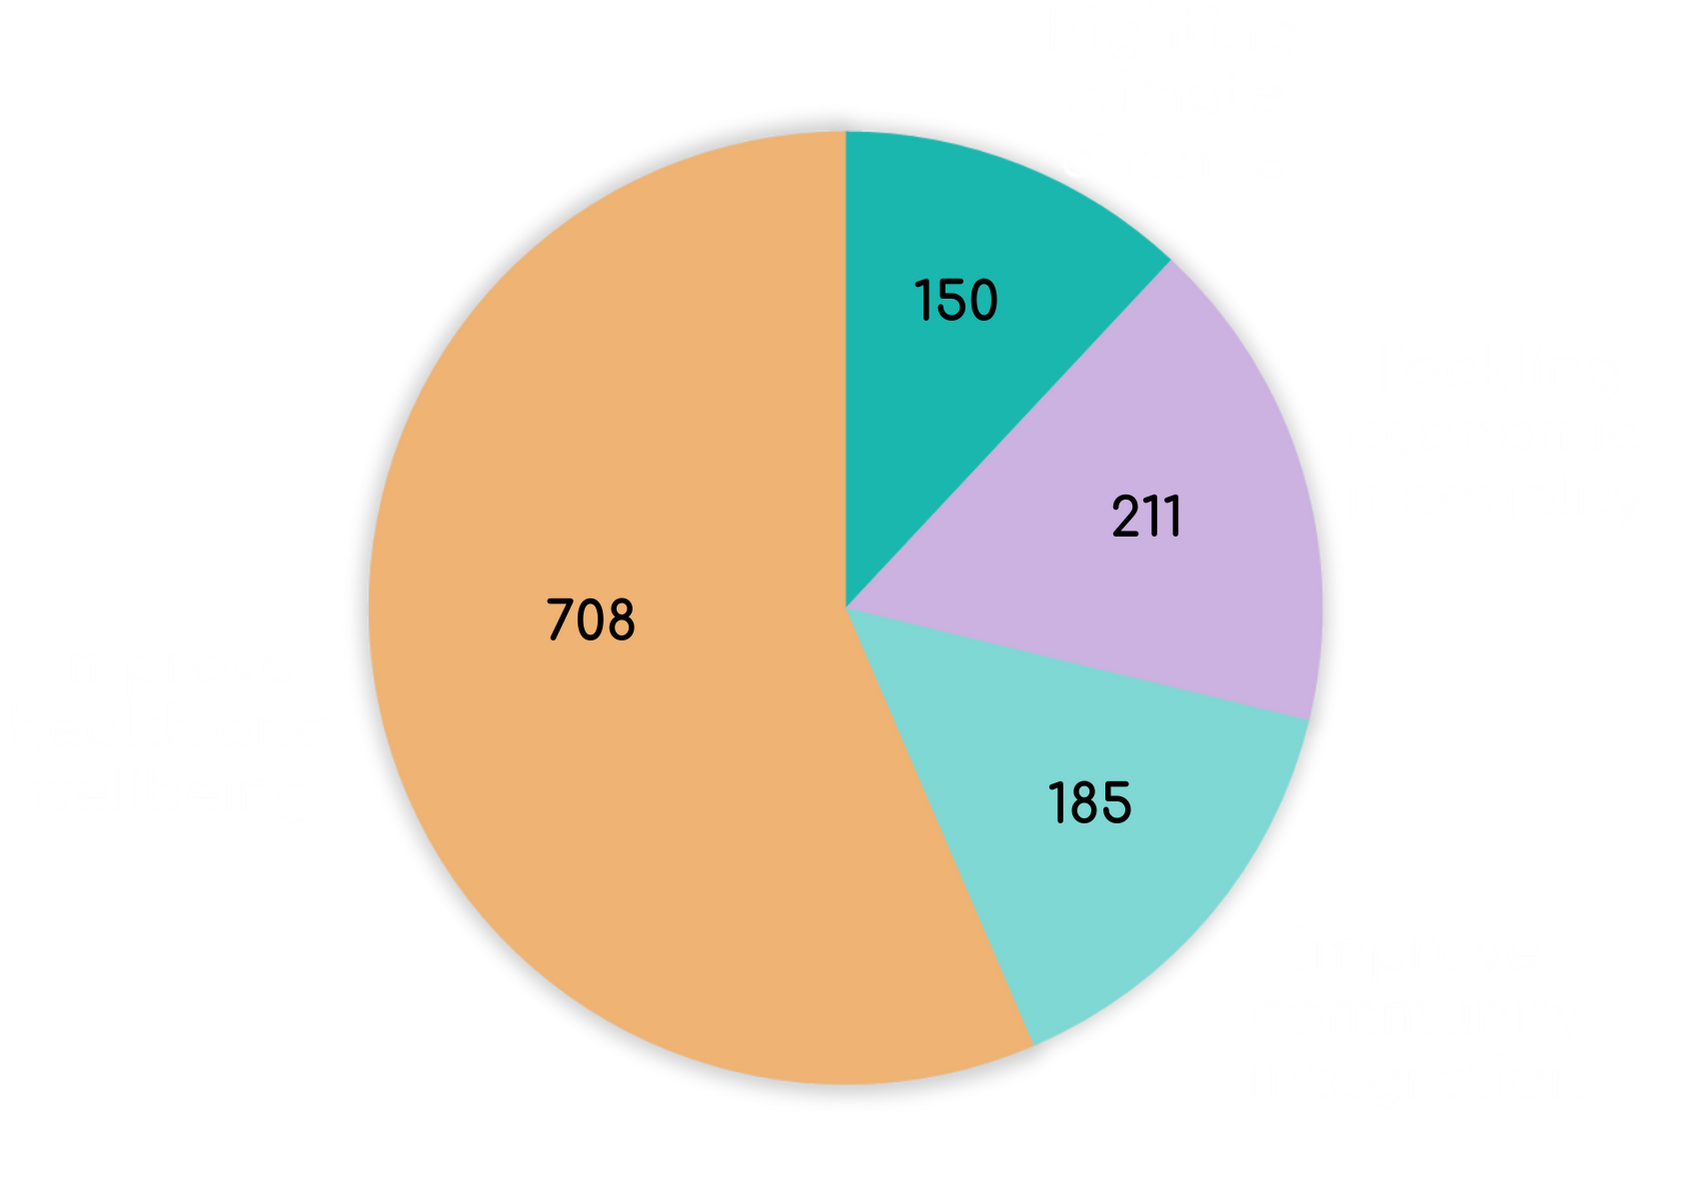 the Pie chart shows ... : 150 in fighting climate change, 211 in tackling economic inequality, 185 in improving community integrations, and 708 in improving health and wellbeing